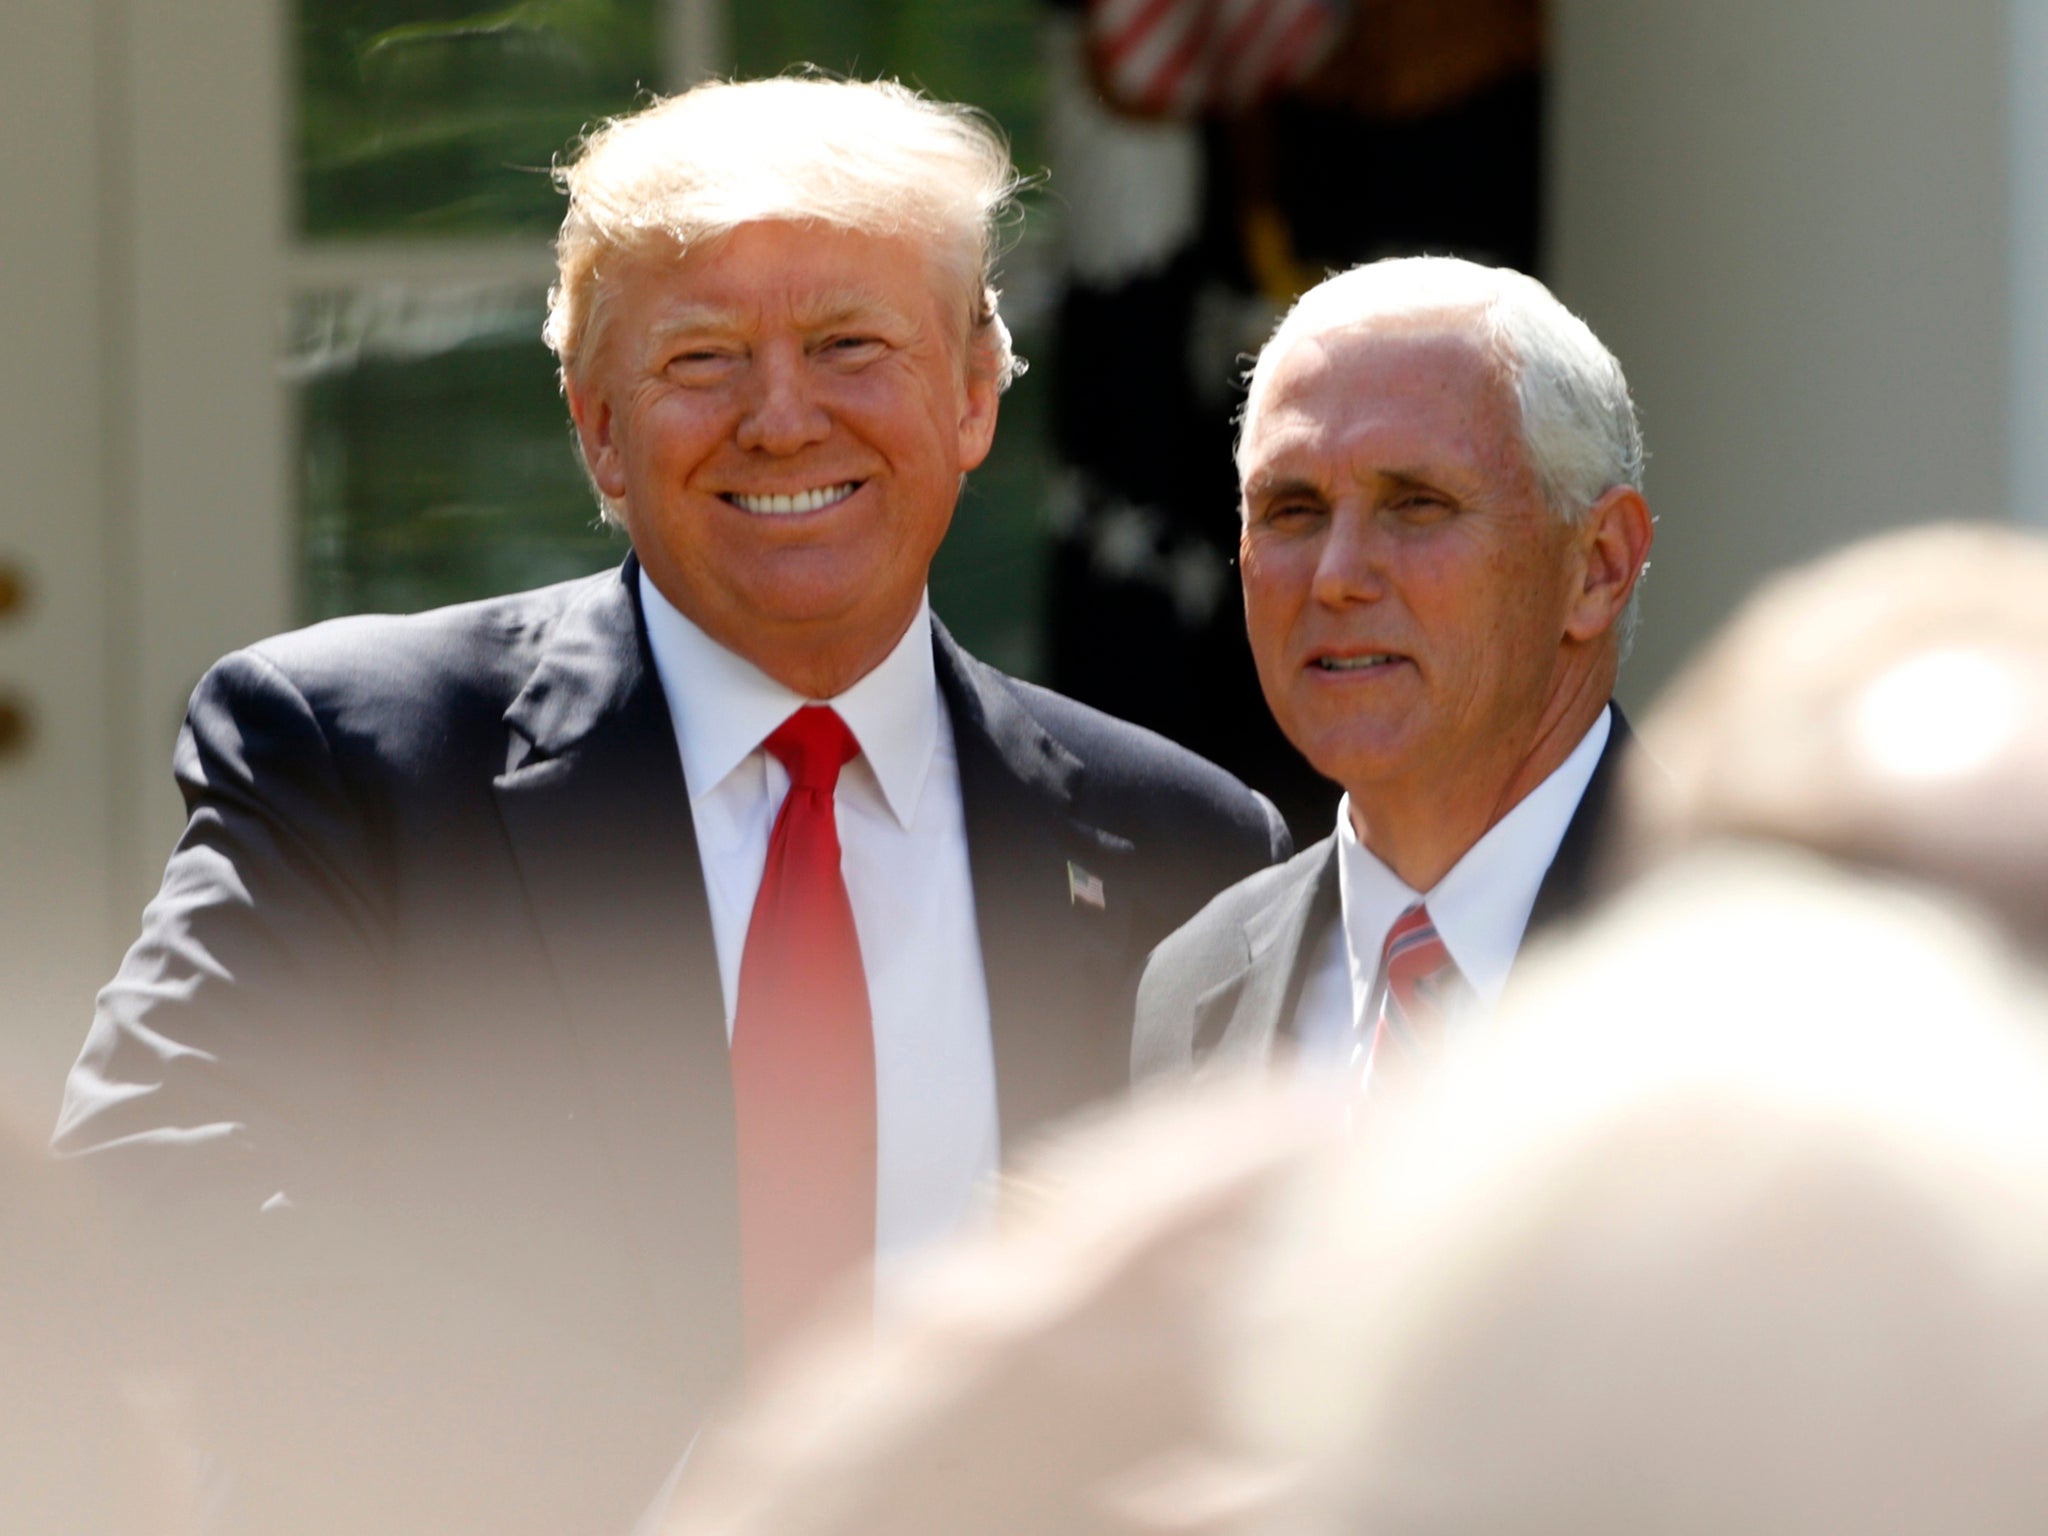 President Donald Trump arrives next to Vice President Mike Pence to announce his decision that the United States will withdraw from the landmark Paris climate agreement